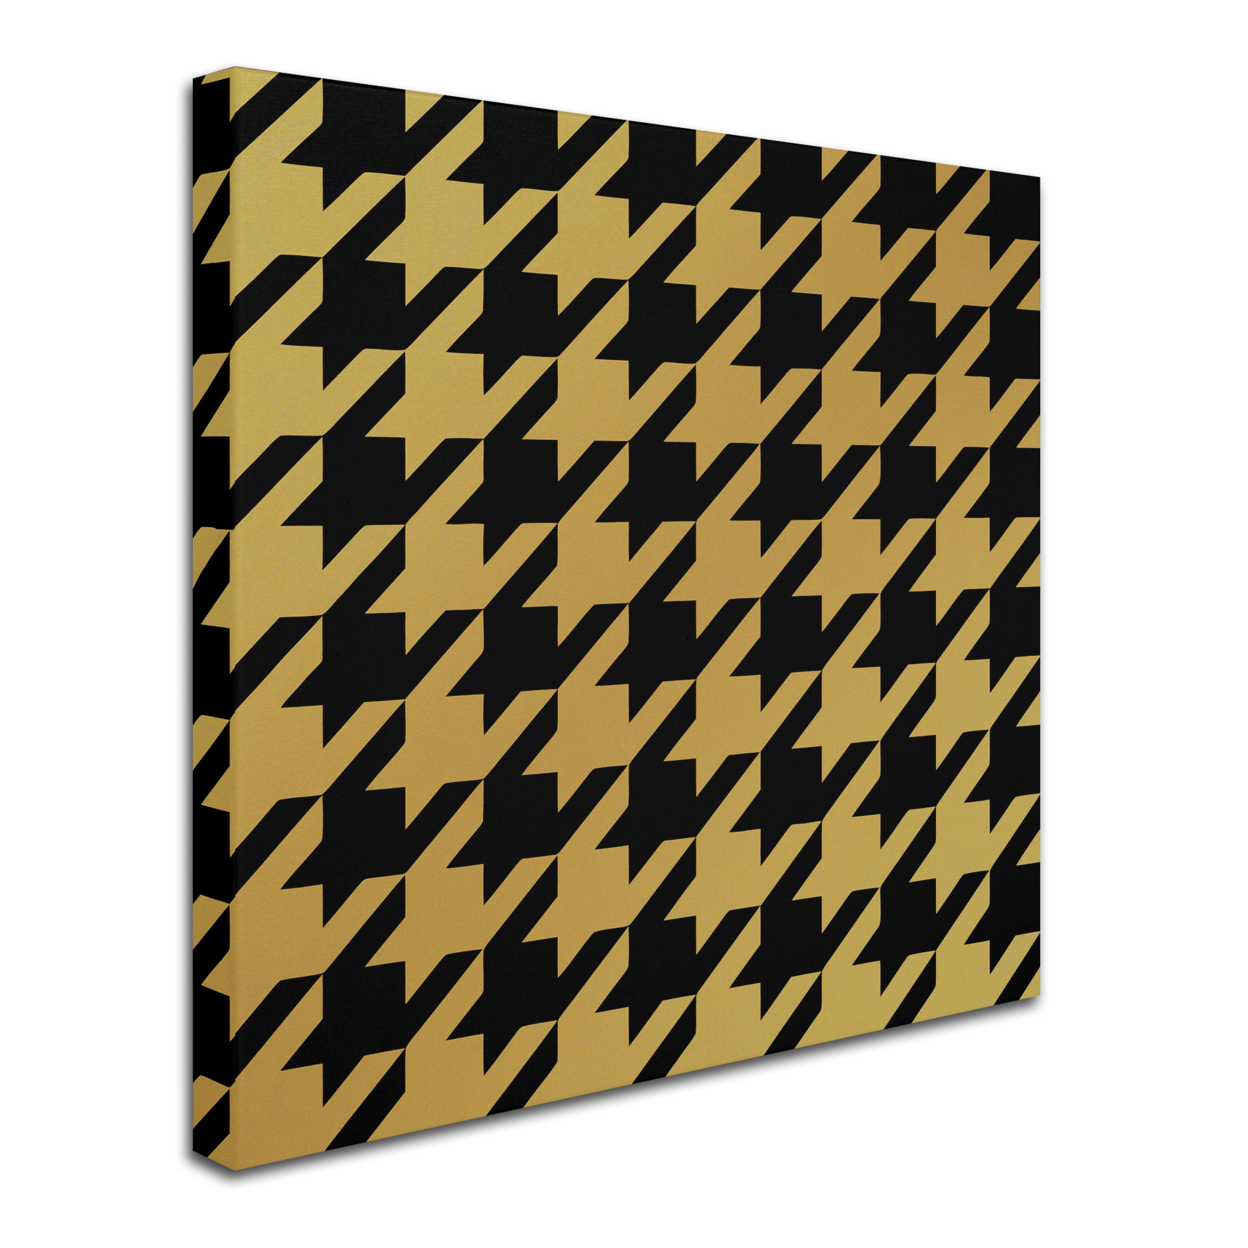 Color Bakery 'Xmas Houndstooth 5' Huge Canvas Art 35 X 35